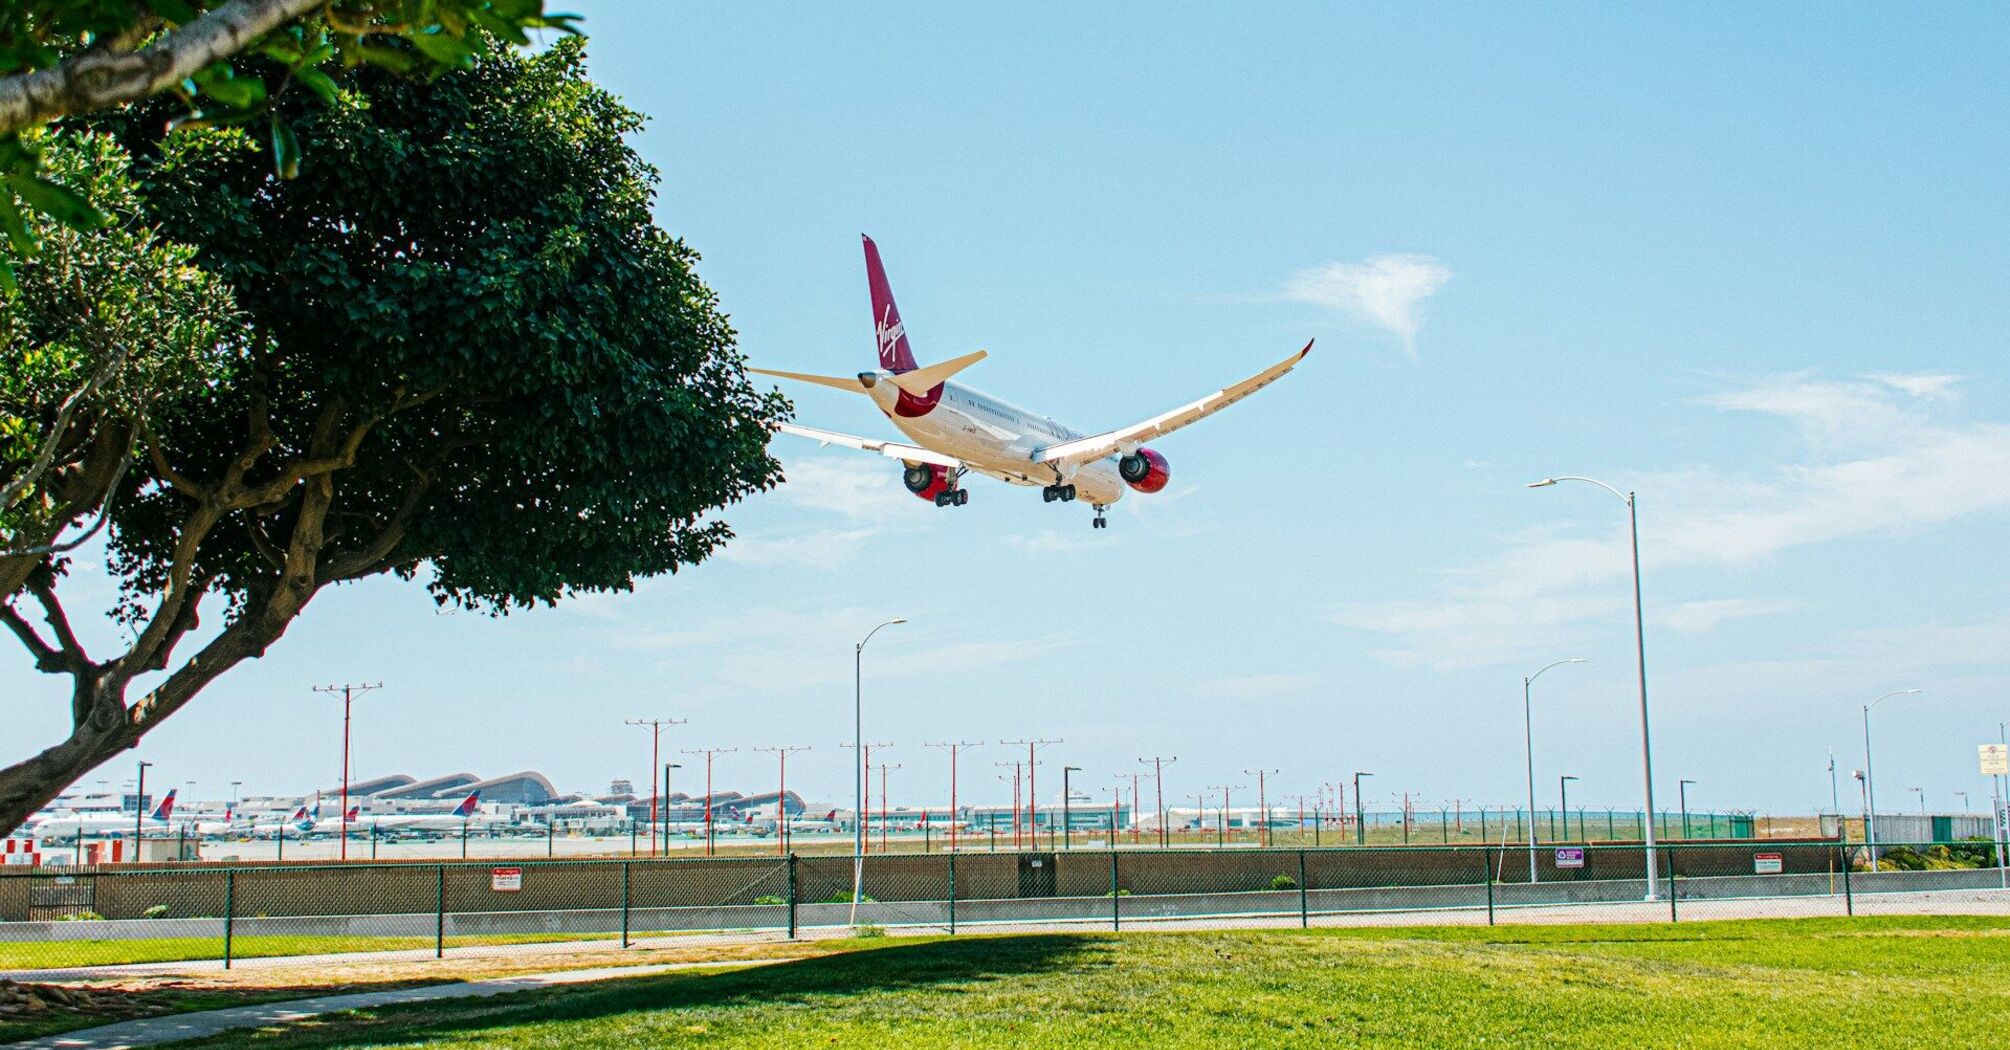 A commercial airplane approaching landing with its landing gear down near a lush green park